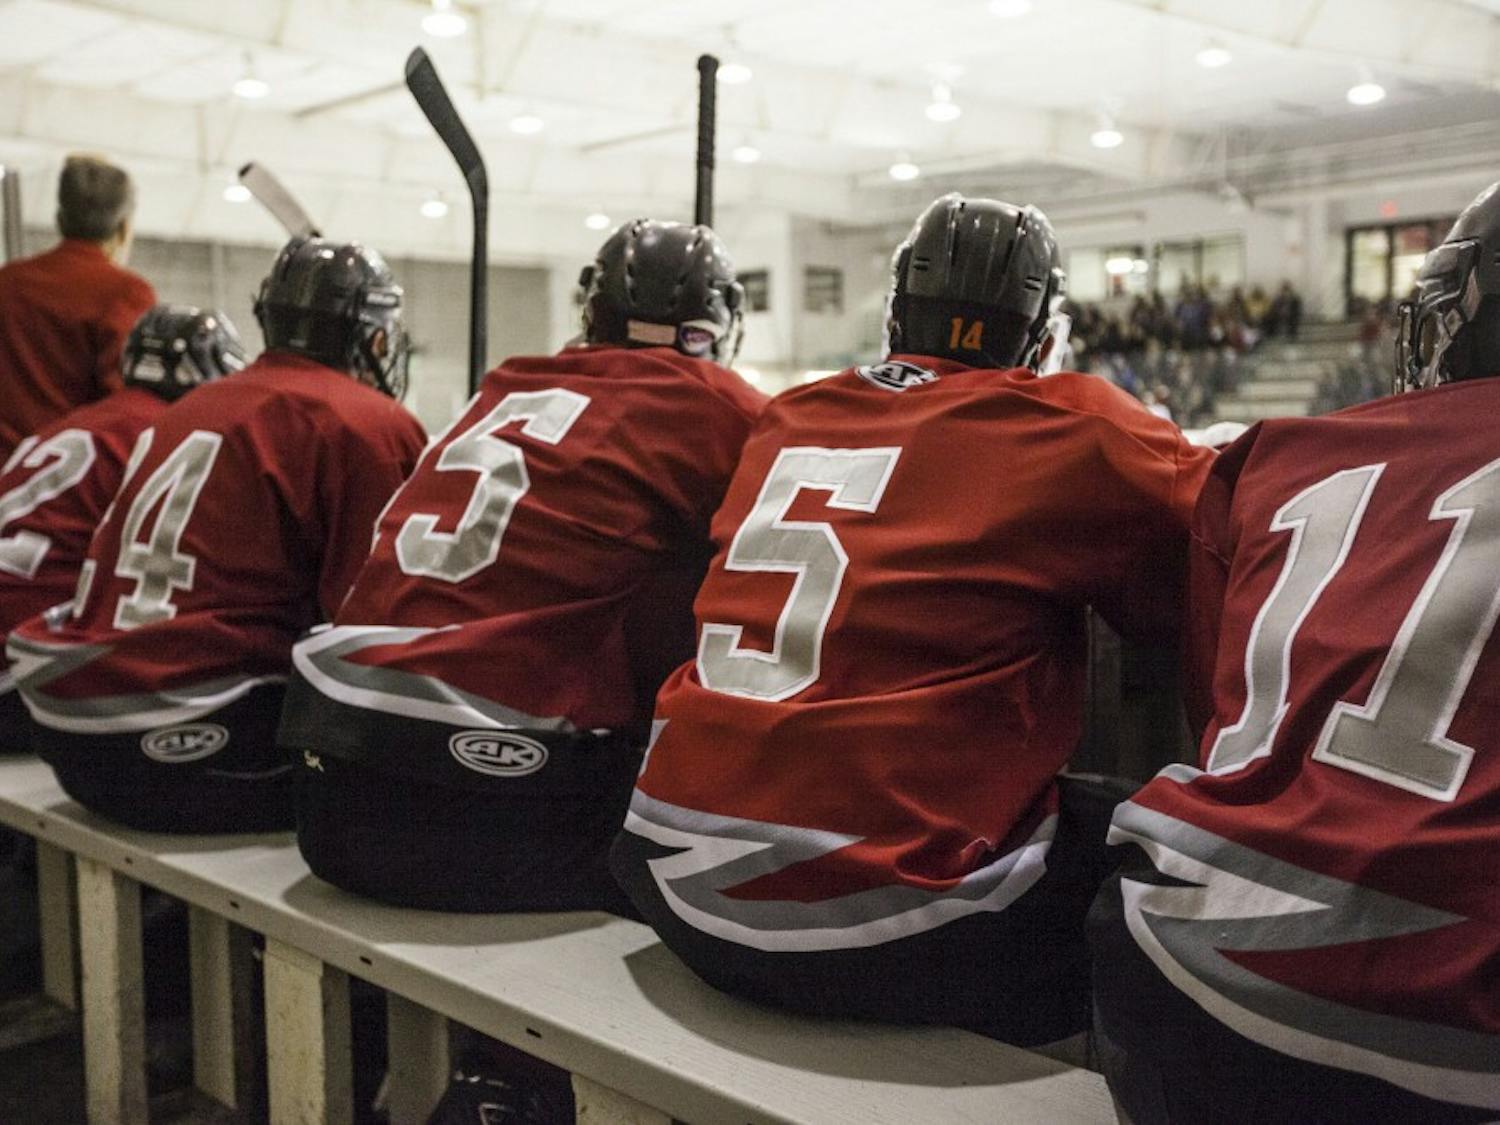 UNM hockey players sit on their bench during a game on Sept. 27, 2013 at the Outpost Arena.